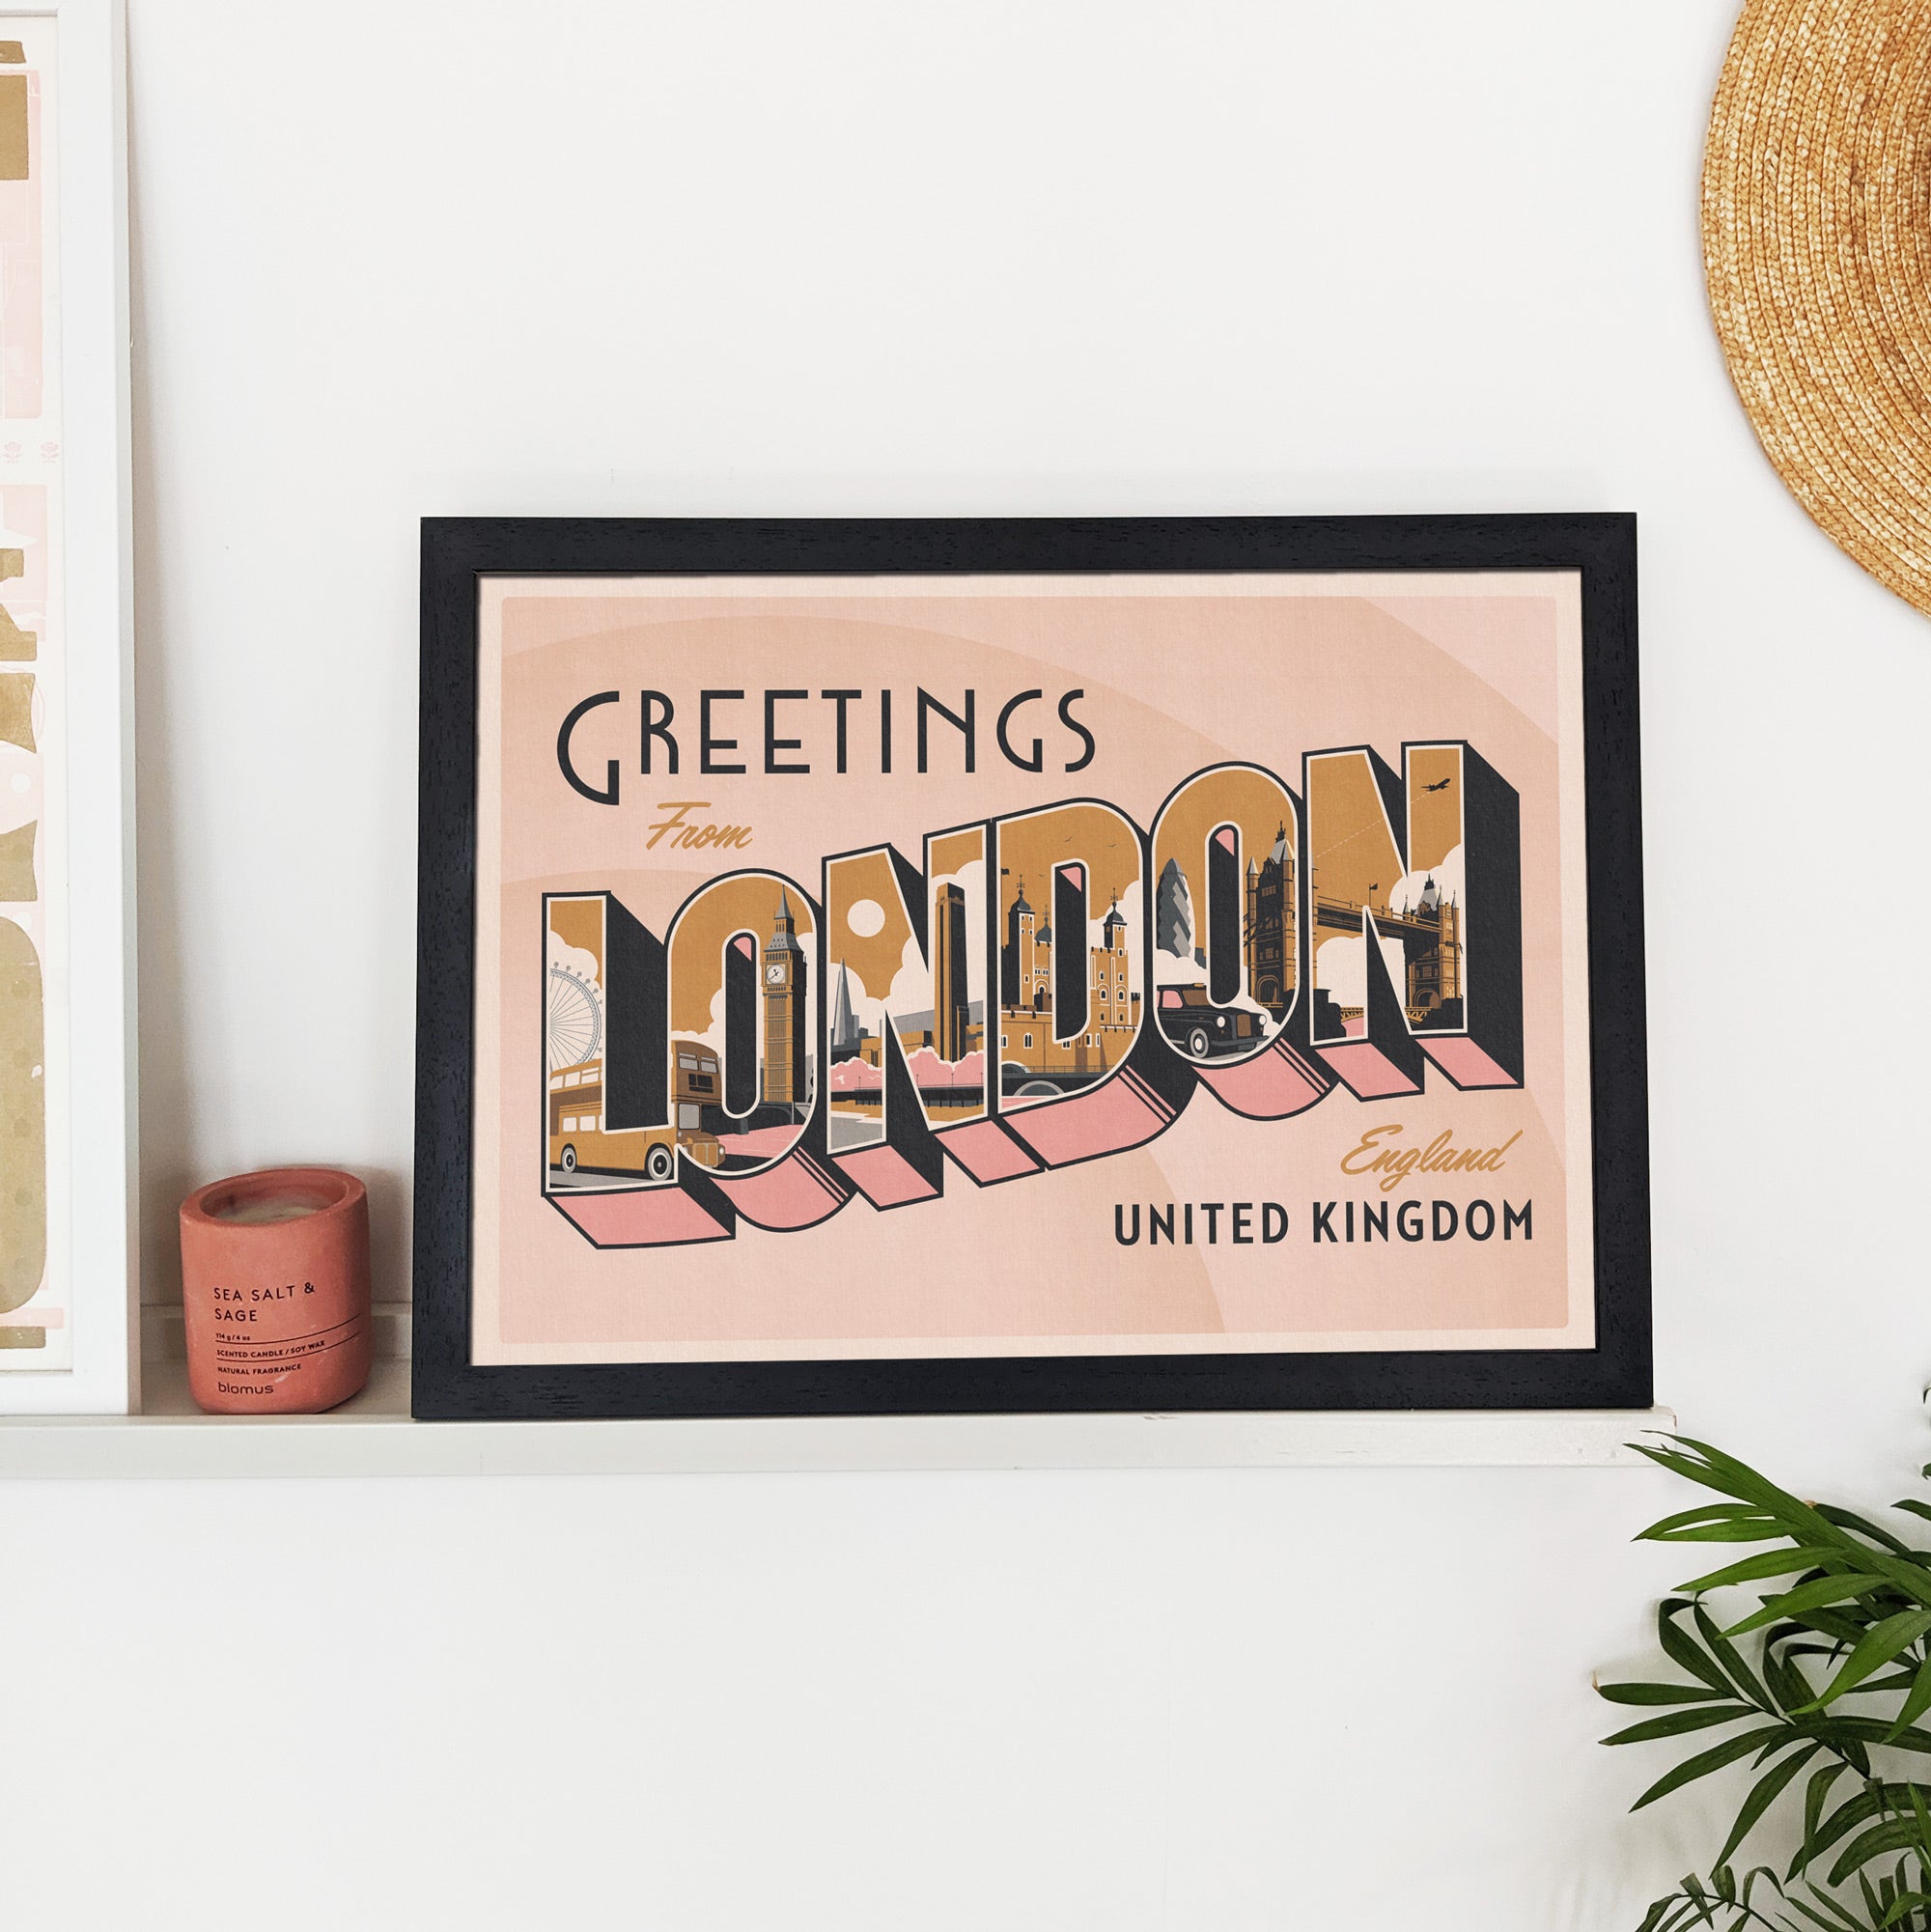 Greetings From London vintage inspired travel wall art